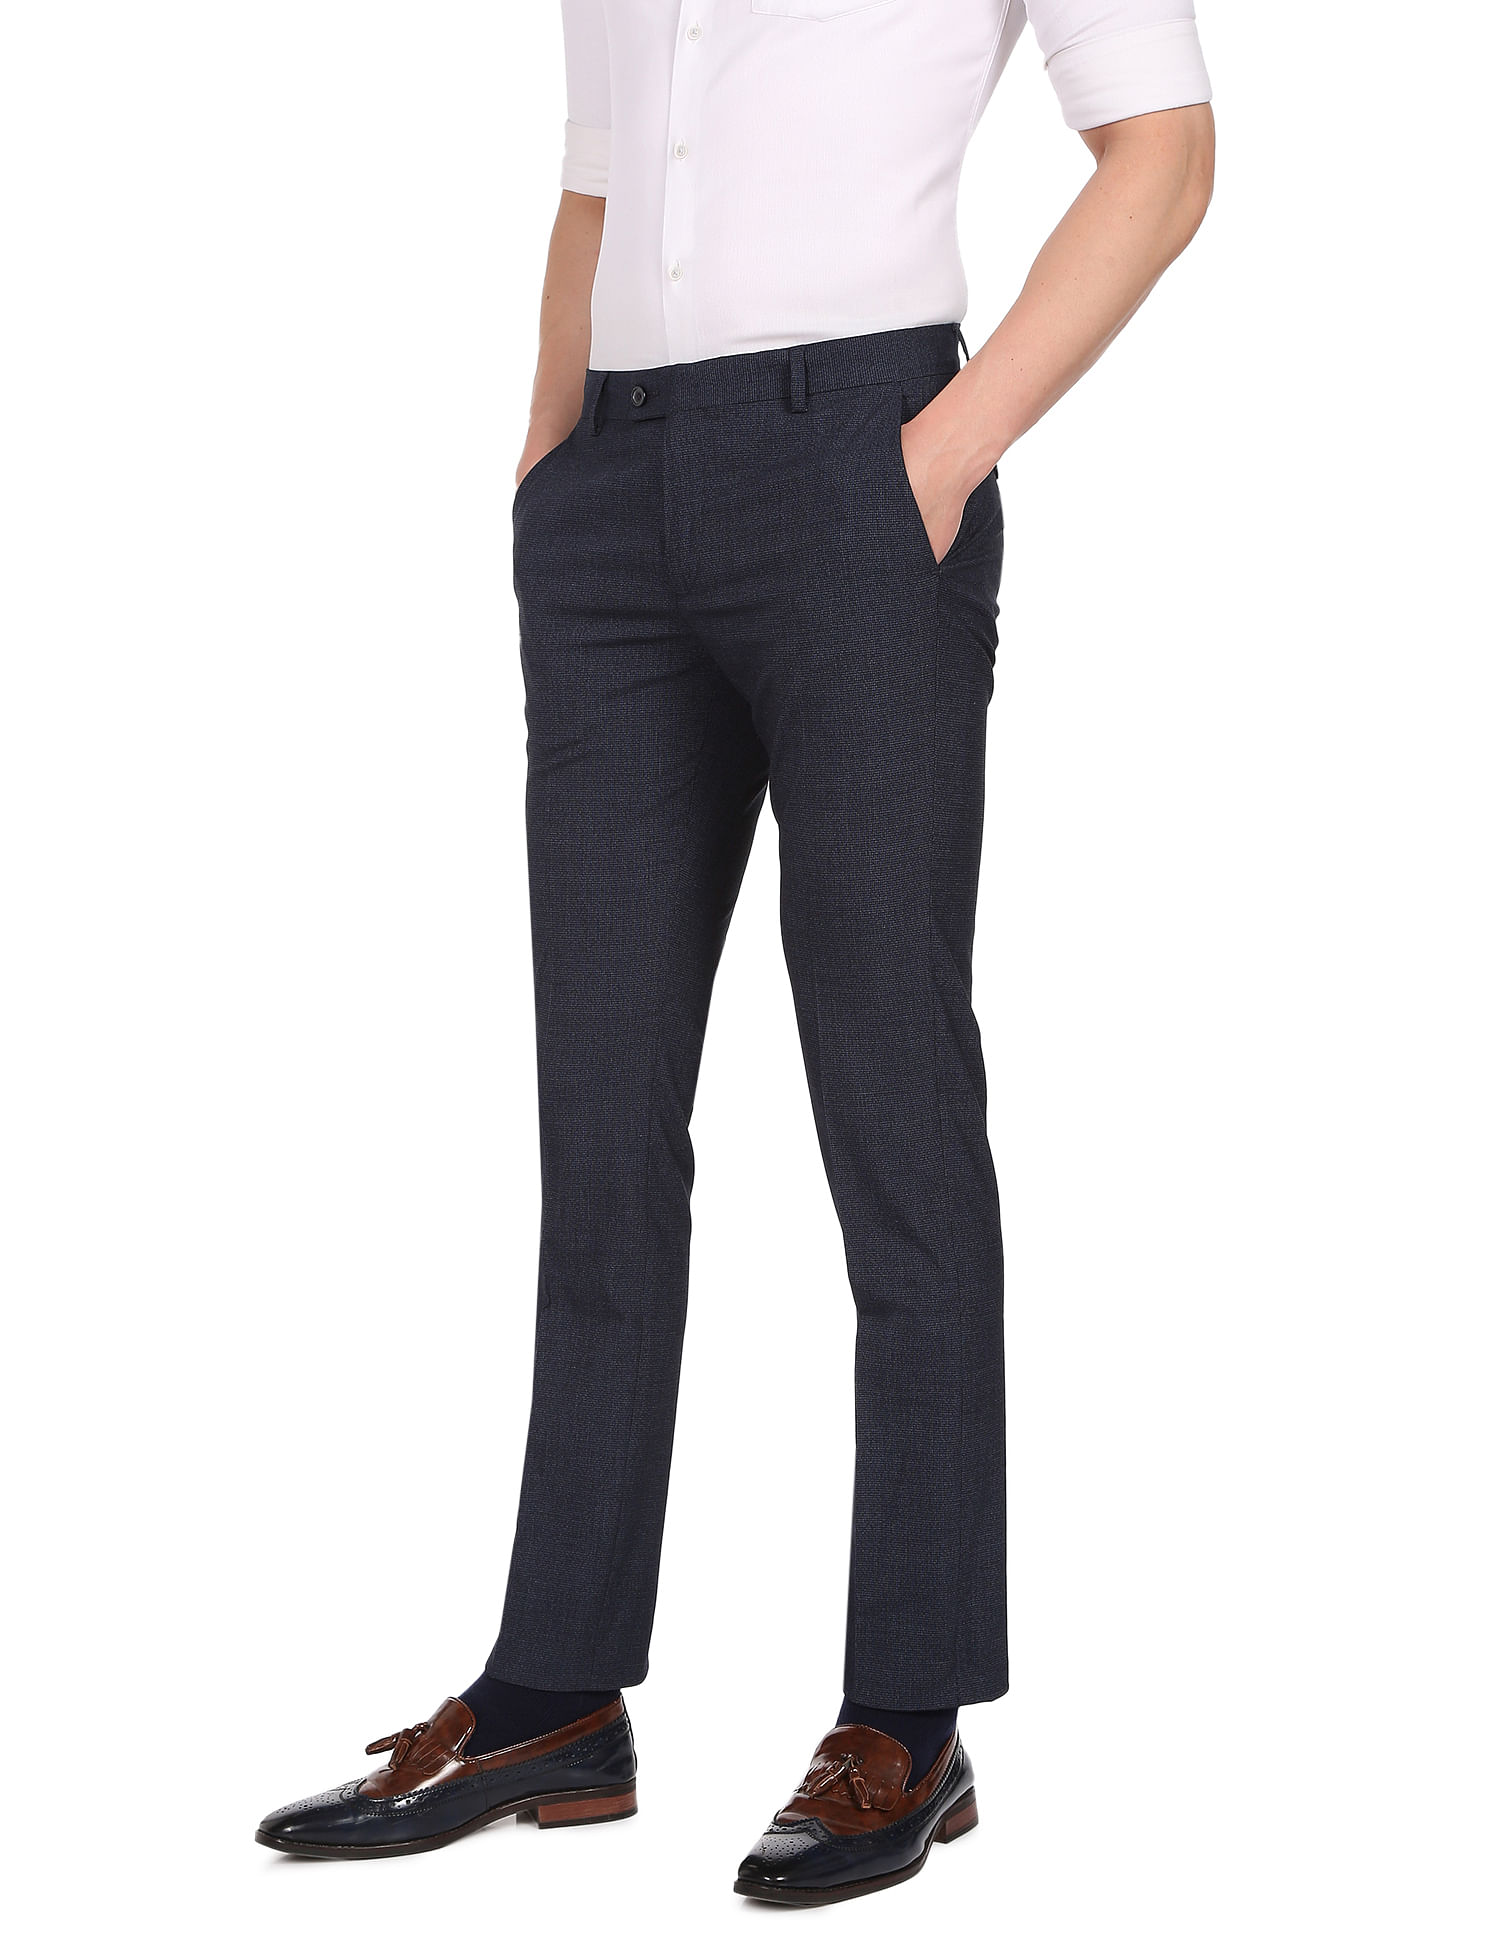 Many Options ARROW Mens Trousers Up to 70 off Starting From Rs574   Flipkart